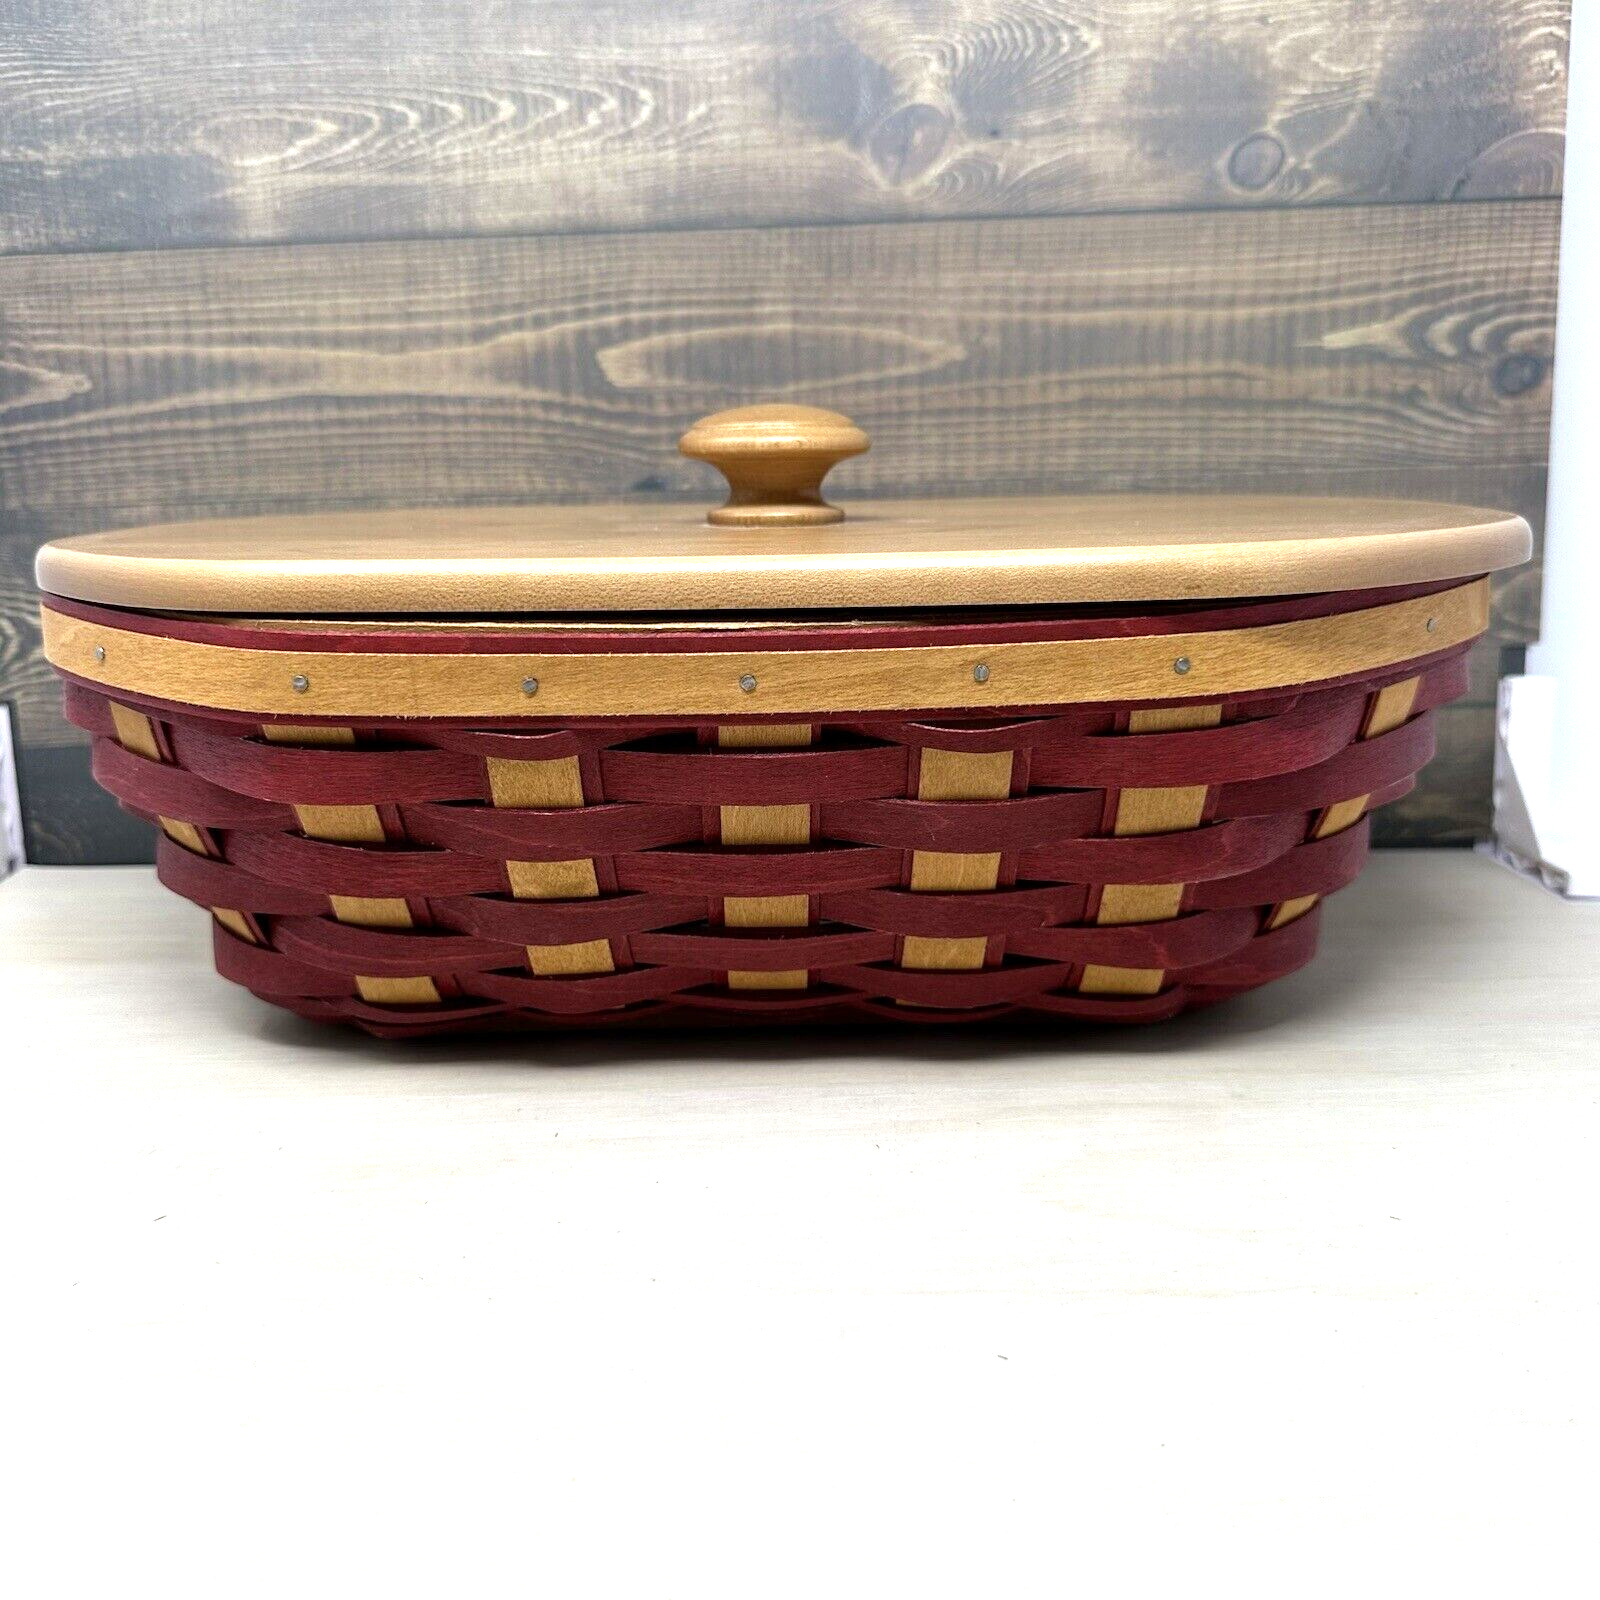 2012 Longaberger Everyday Traditions Paprika Basket Wood Lid and Protector